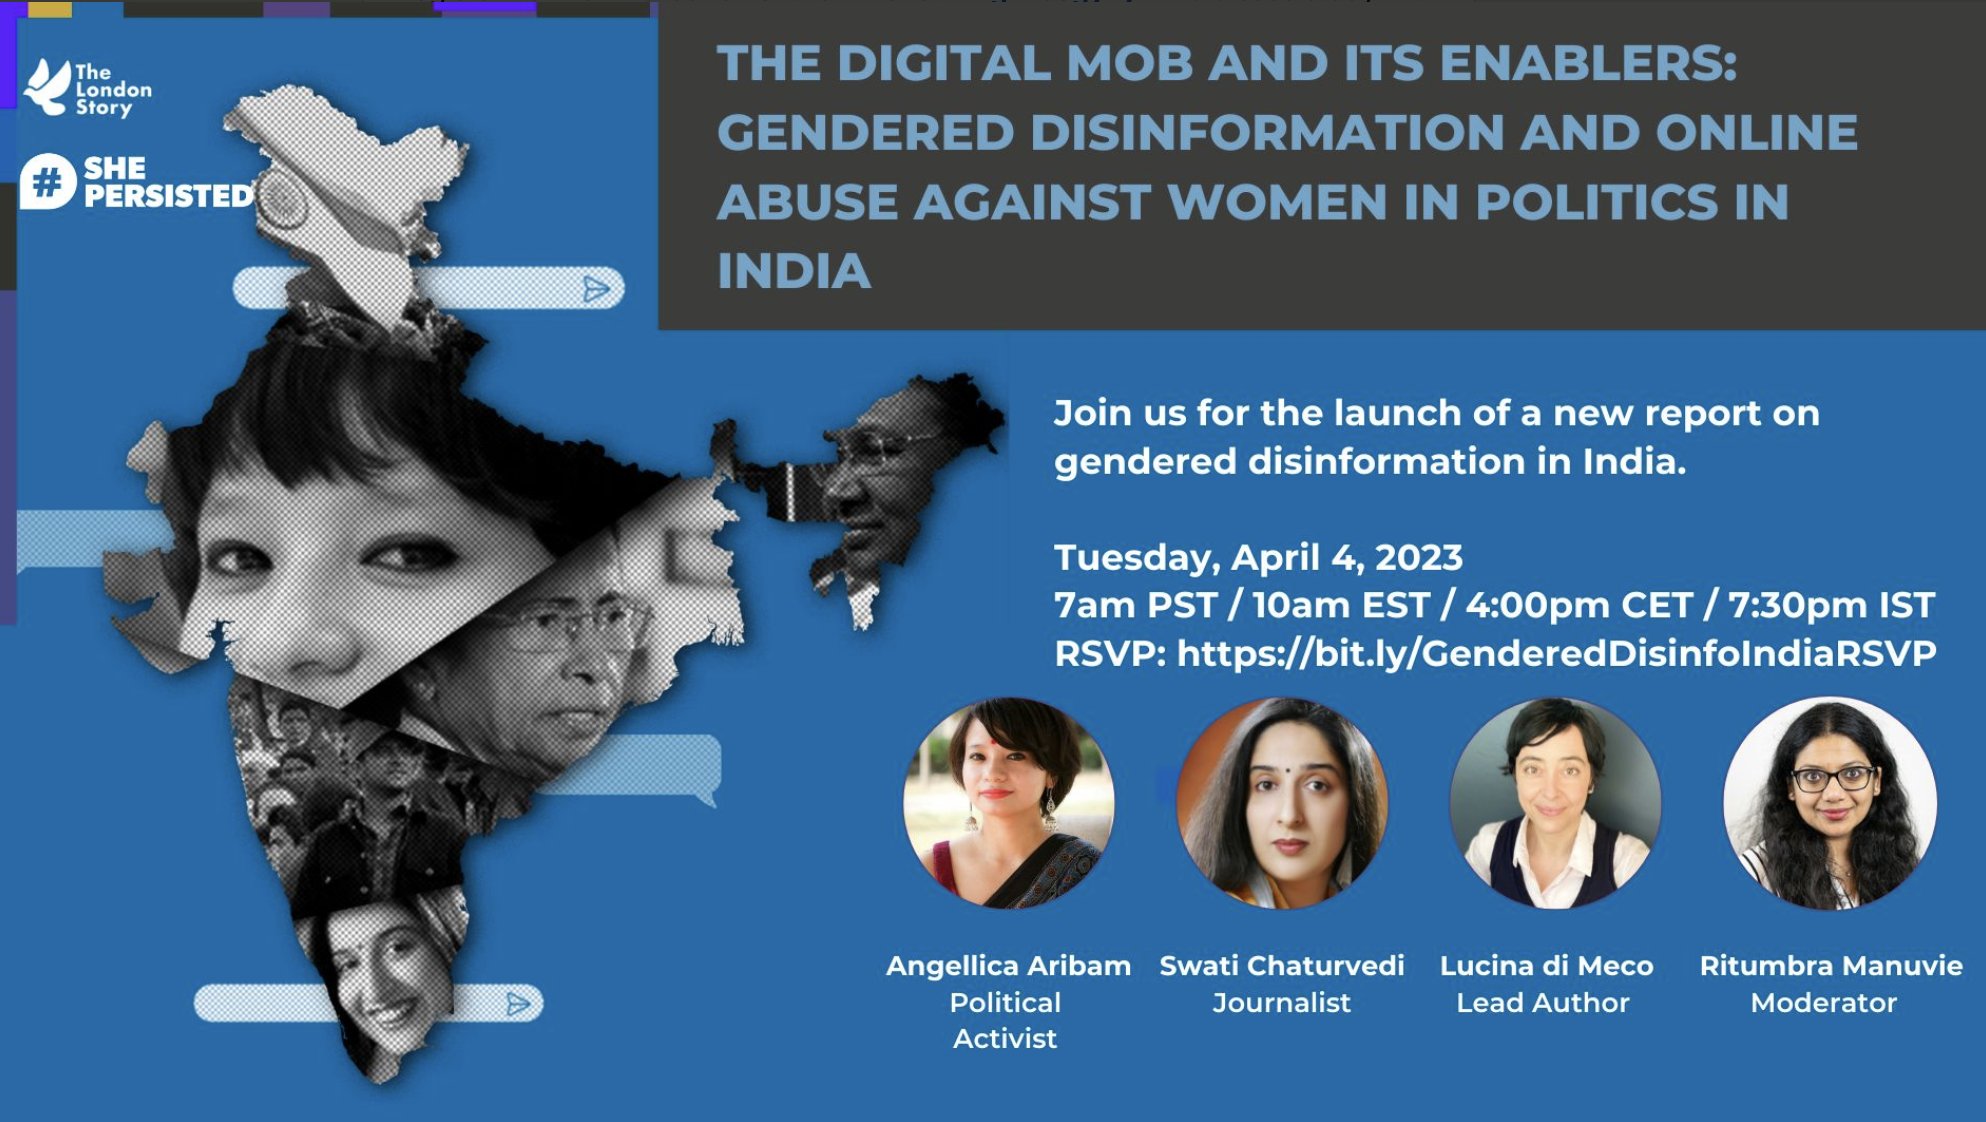 The digital mob and its enablers: Gendered disinformation and online abuse against women in politics in India